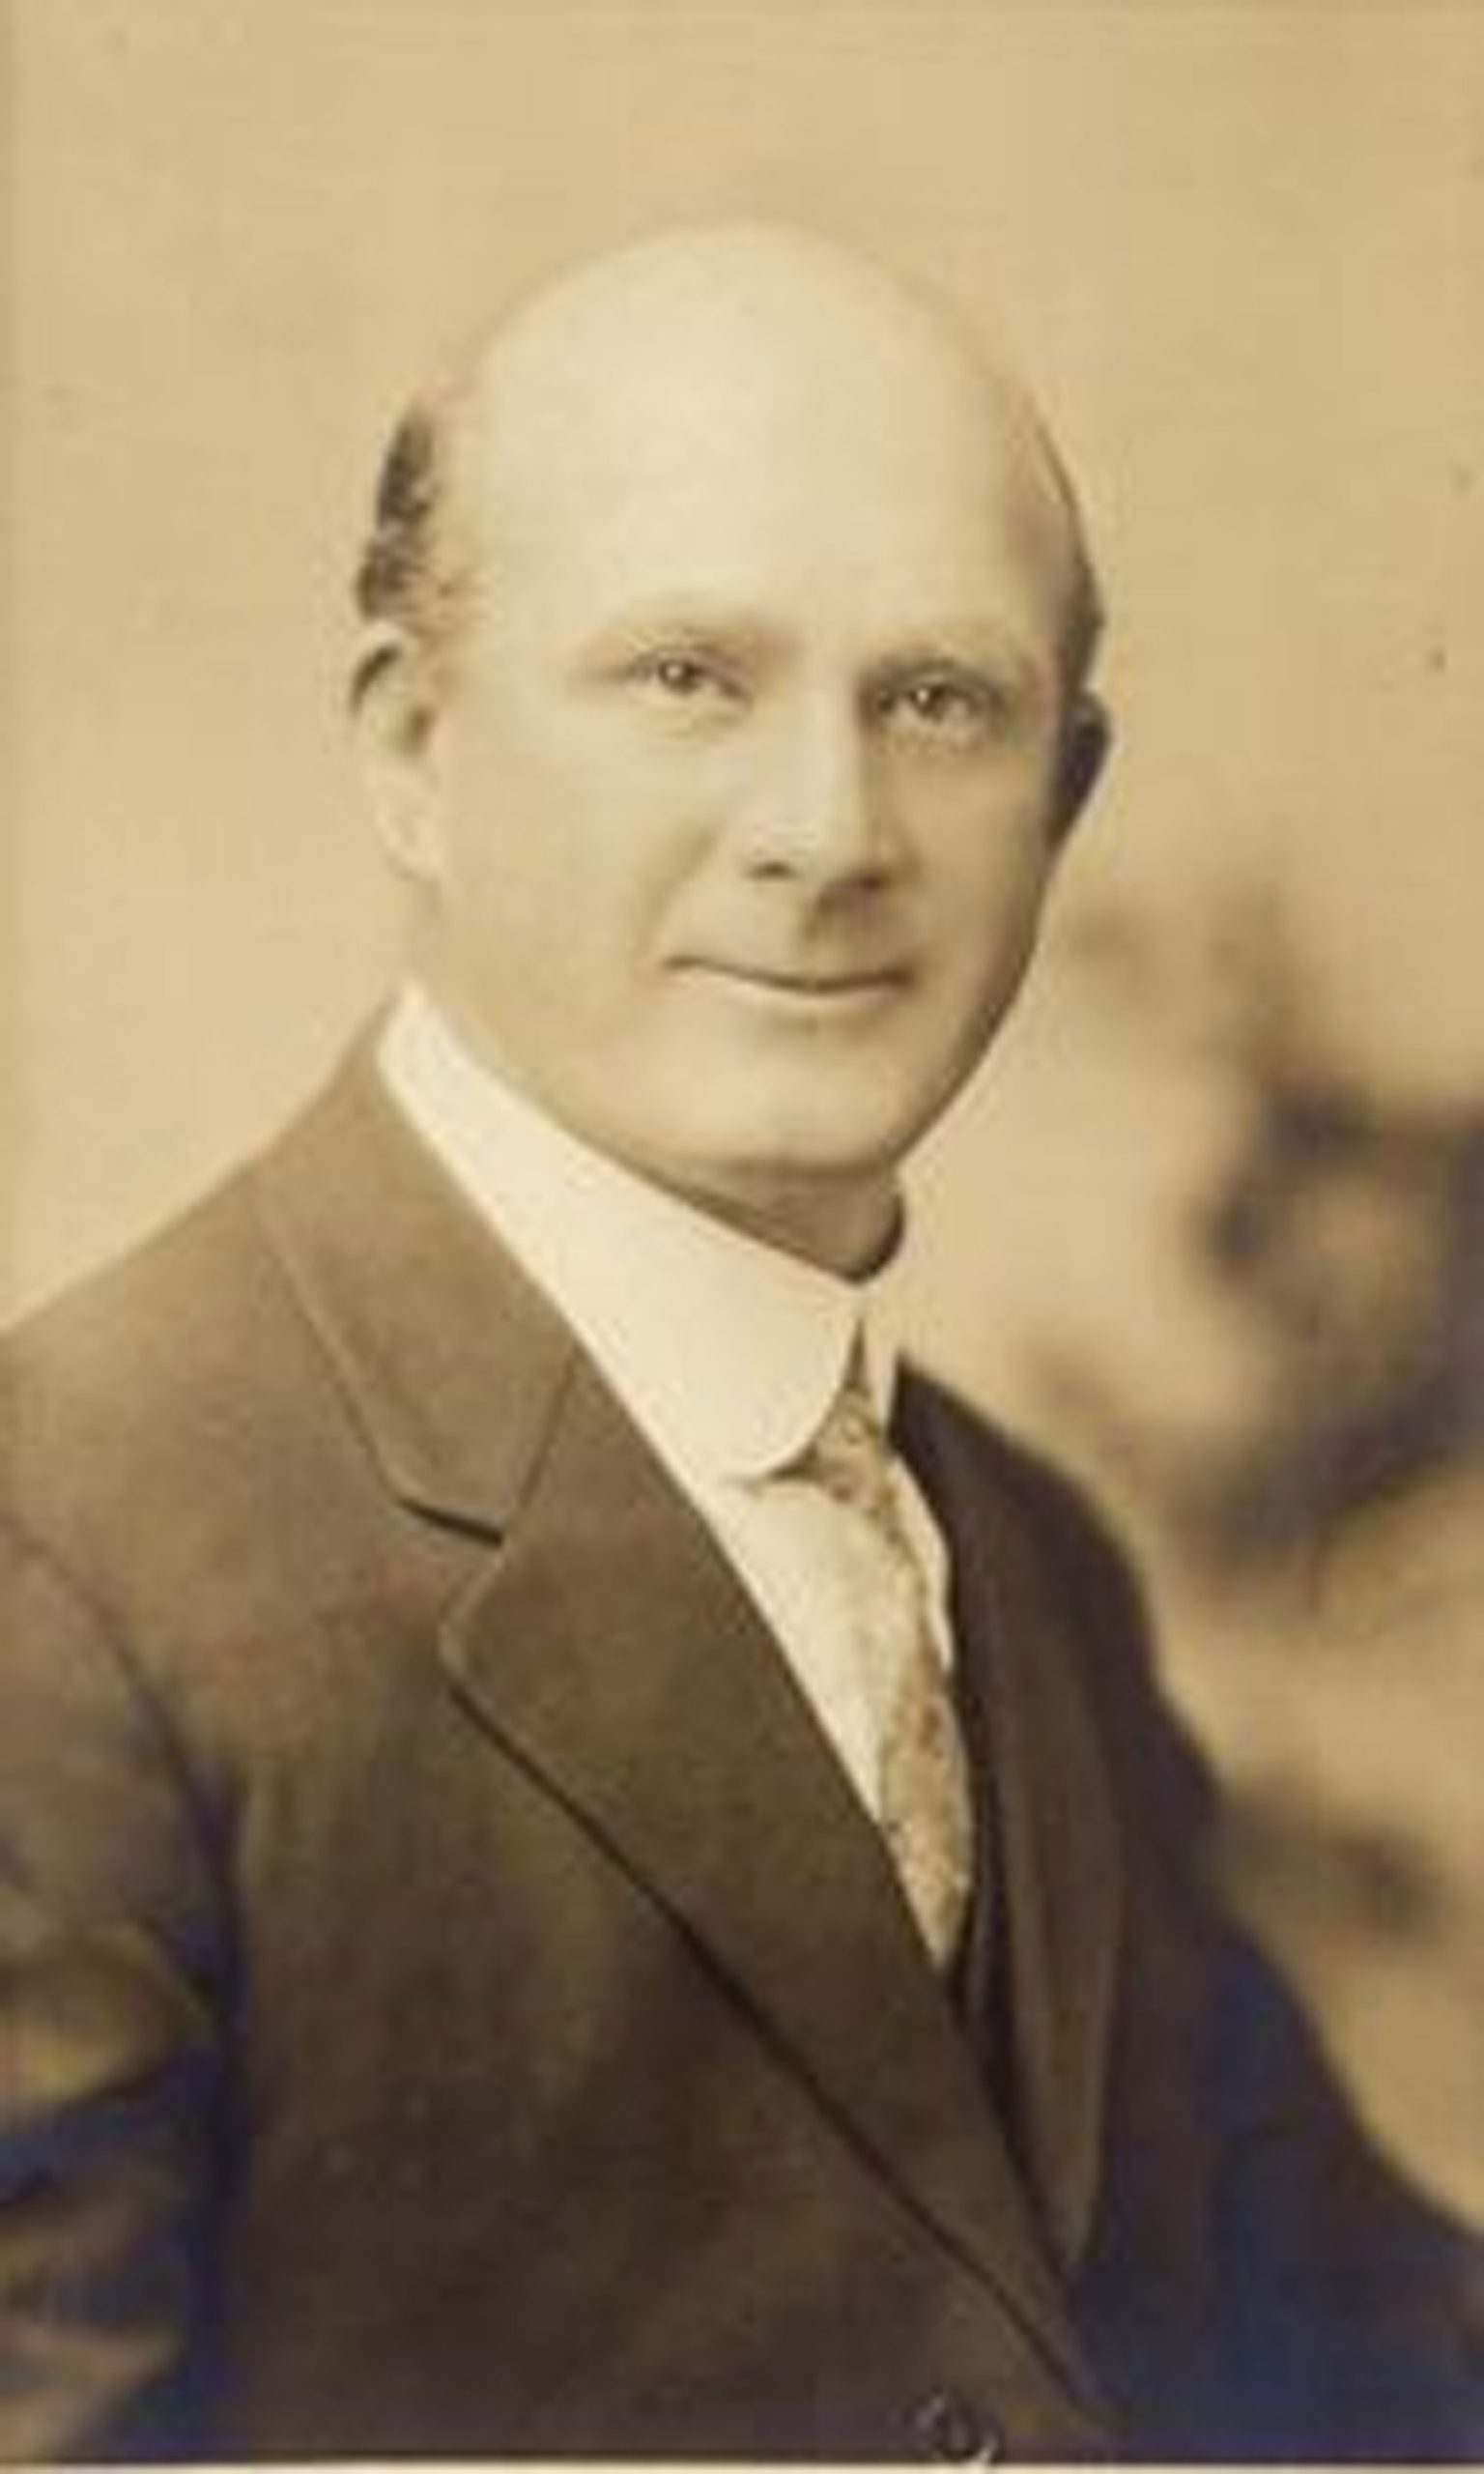 Albert Parfitt (1885-1961) was a member of Vancouver & Quadra Lodge No. 2 in Victoria. He was one of the partners in the Parfitt Brothers construction firm (photo courtesy of Glenn Parfitt - family photo, used with permission)